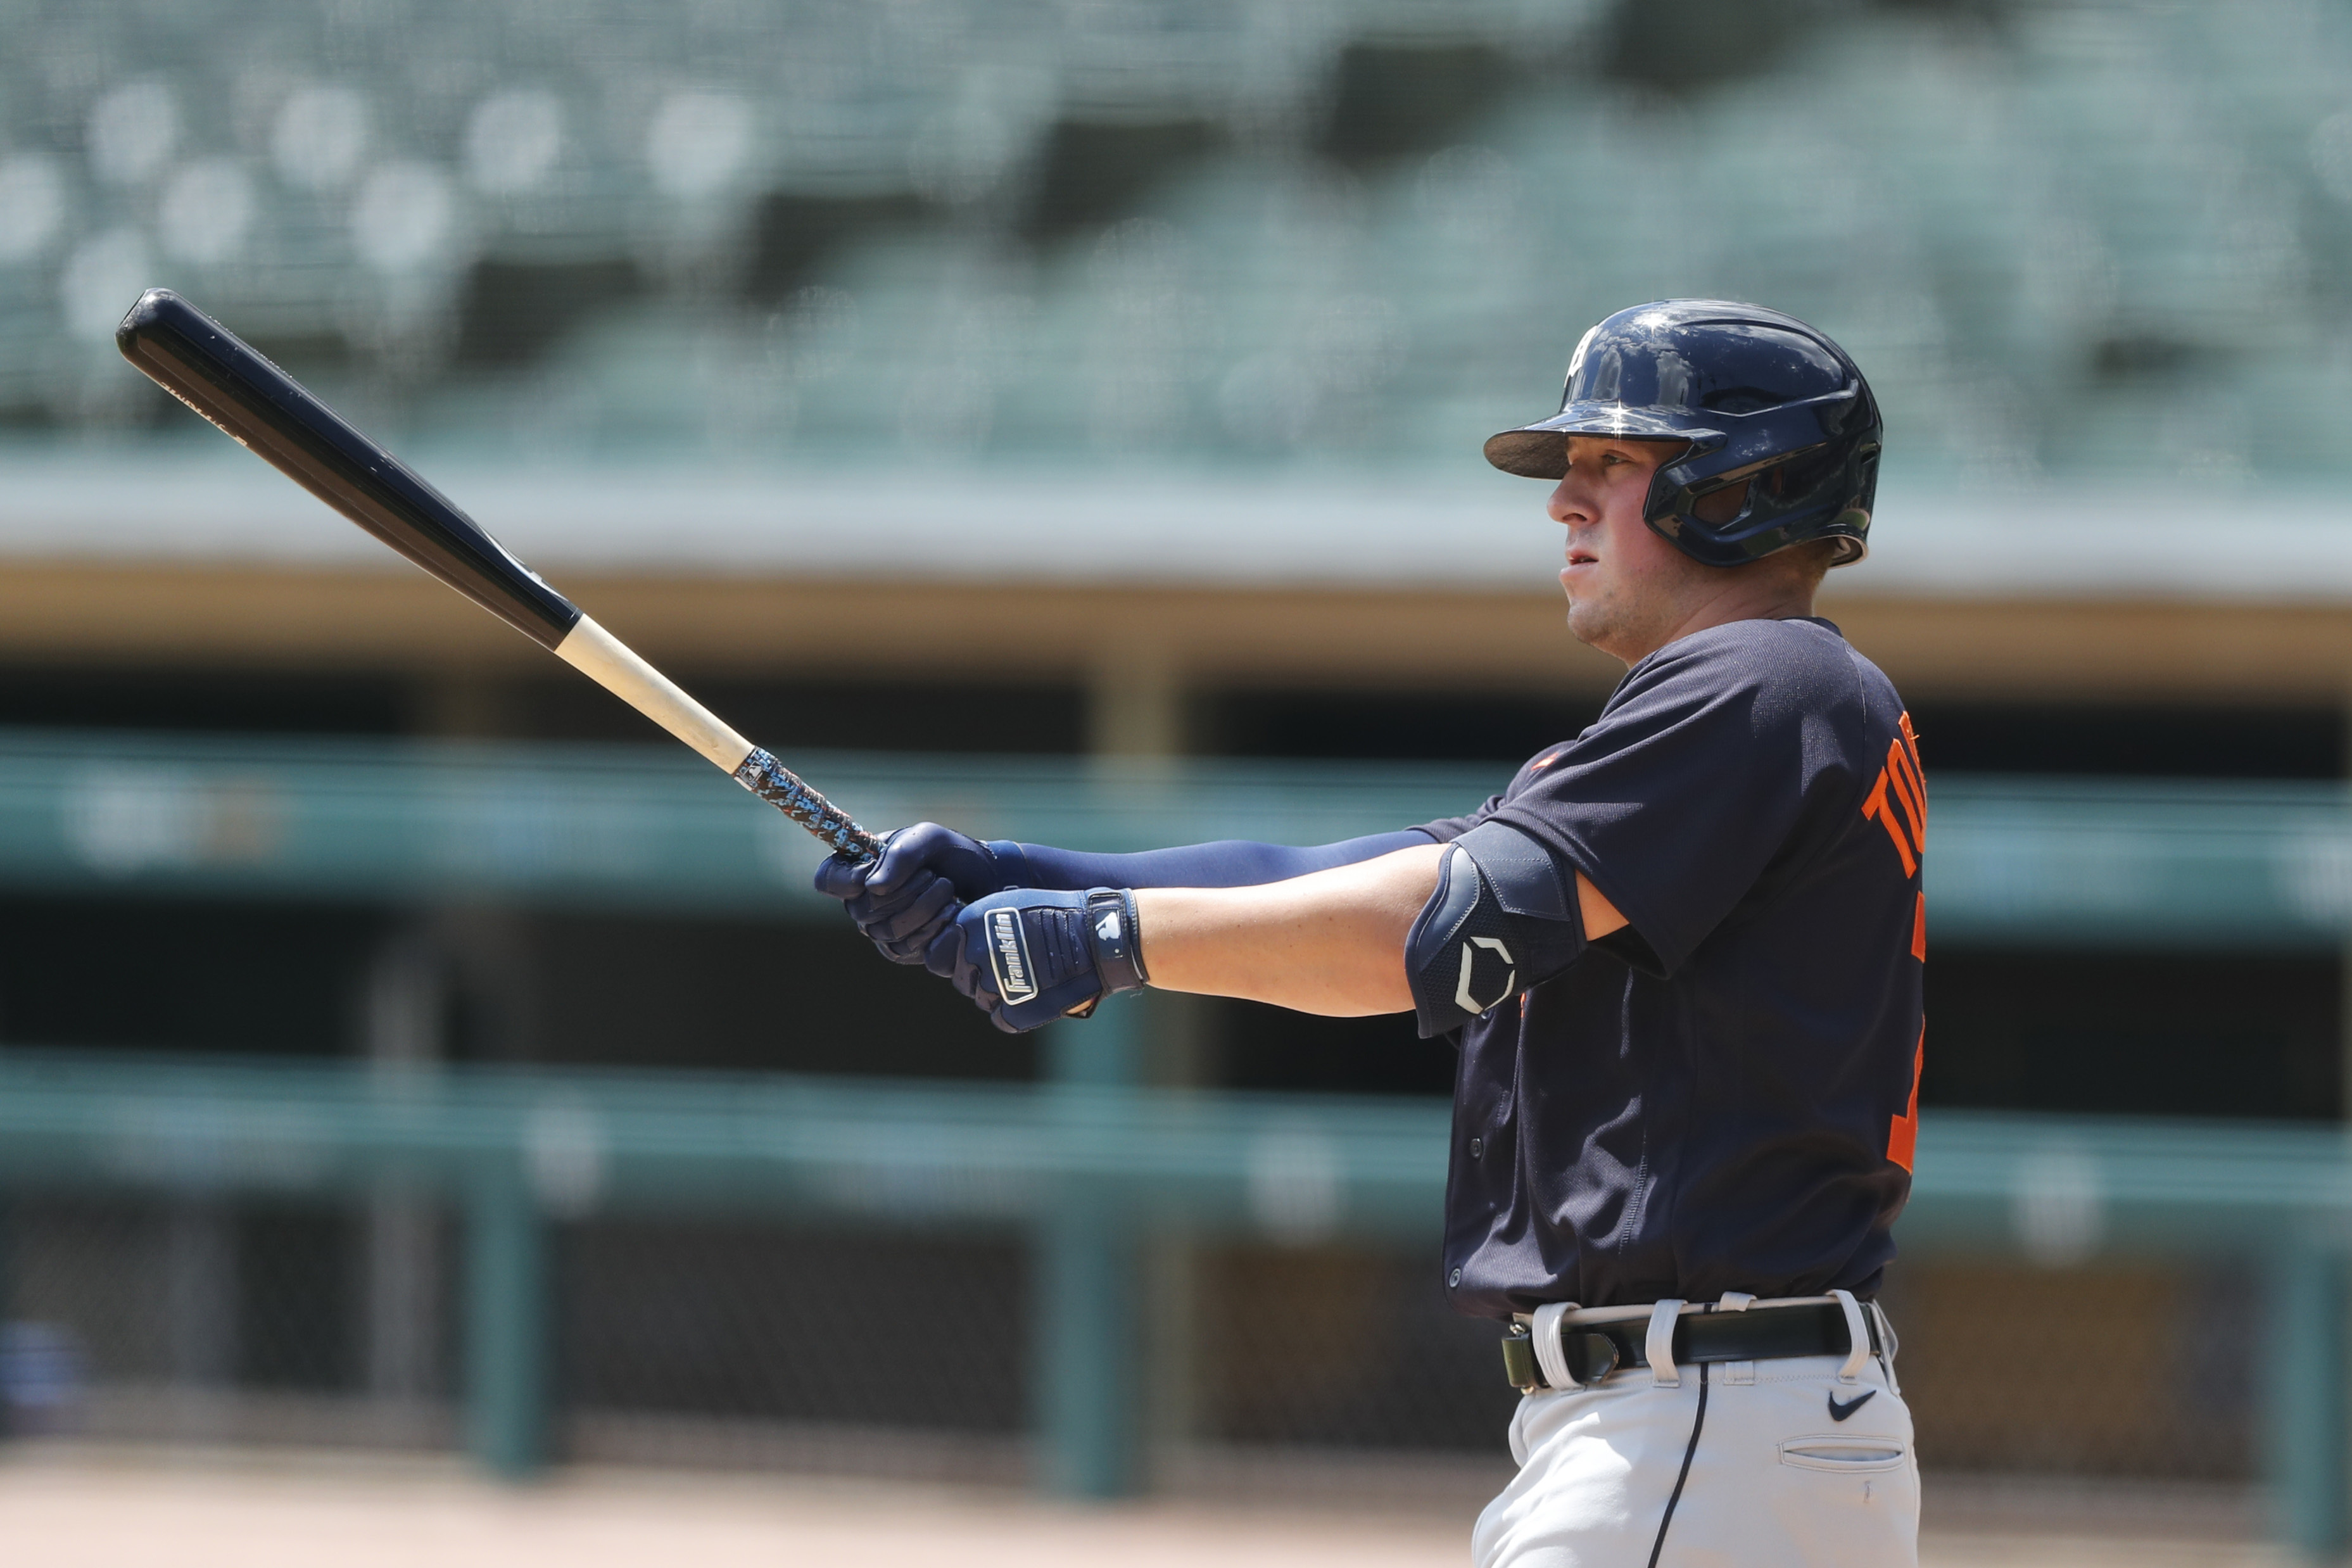 3B Spencer Torkelson Selected by Tigers as No. 1 Overall Pick in